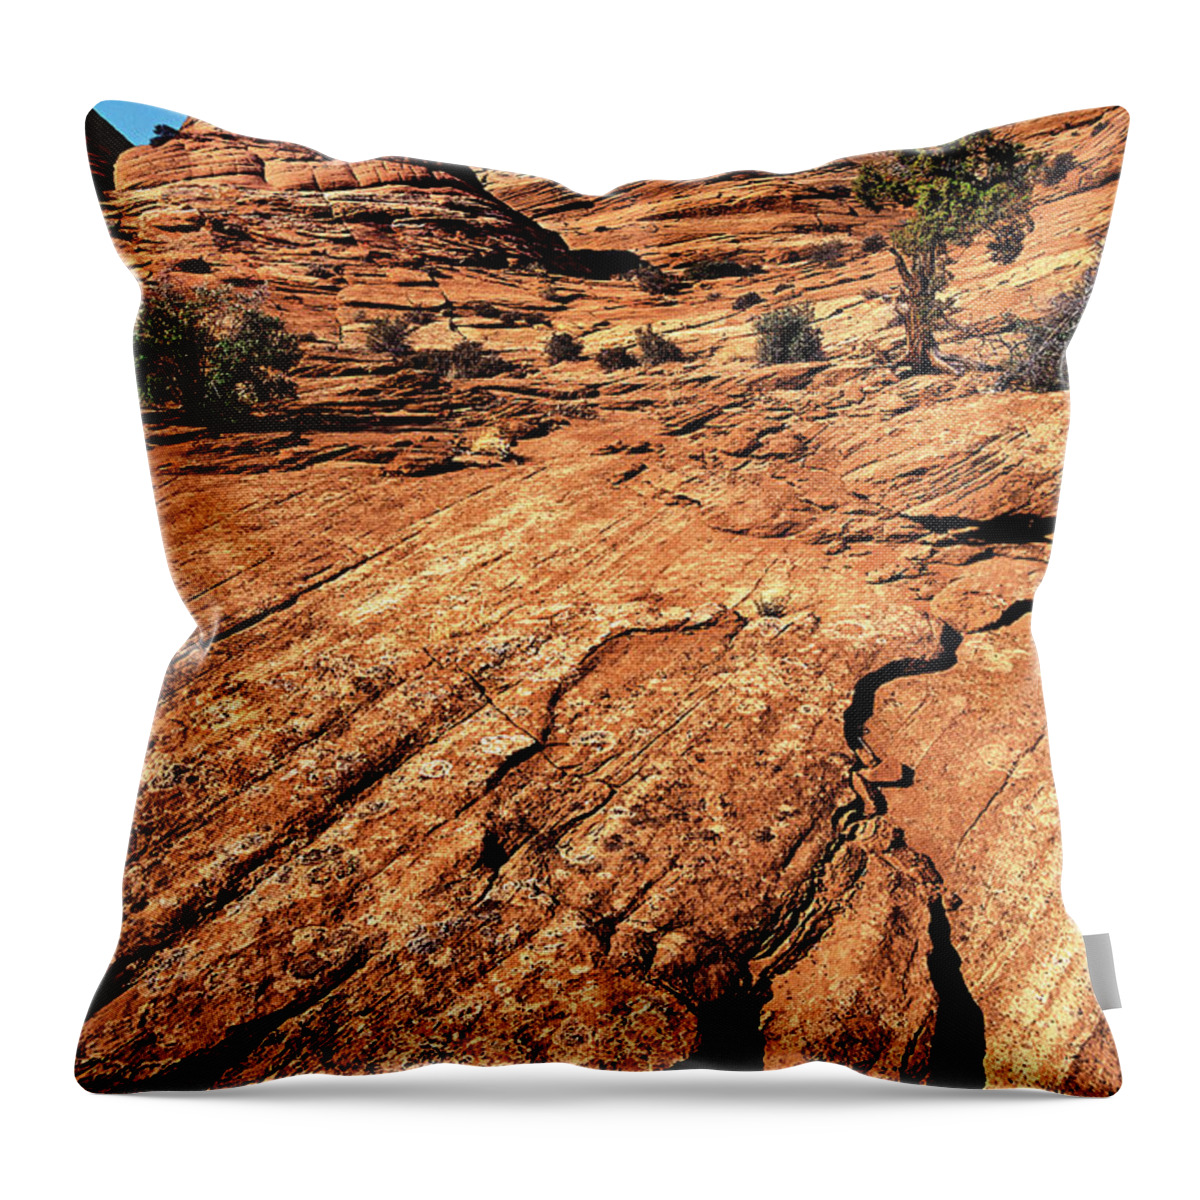 Dave Welling Throw Pillow featuring the photograph Remote Sandstone Formations Paria Canyon Utah by Dave Welling